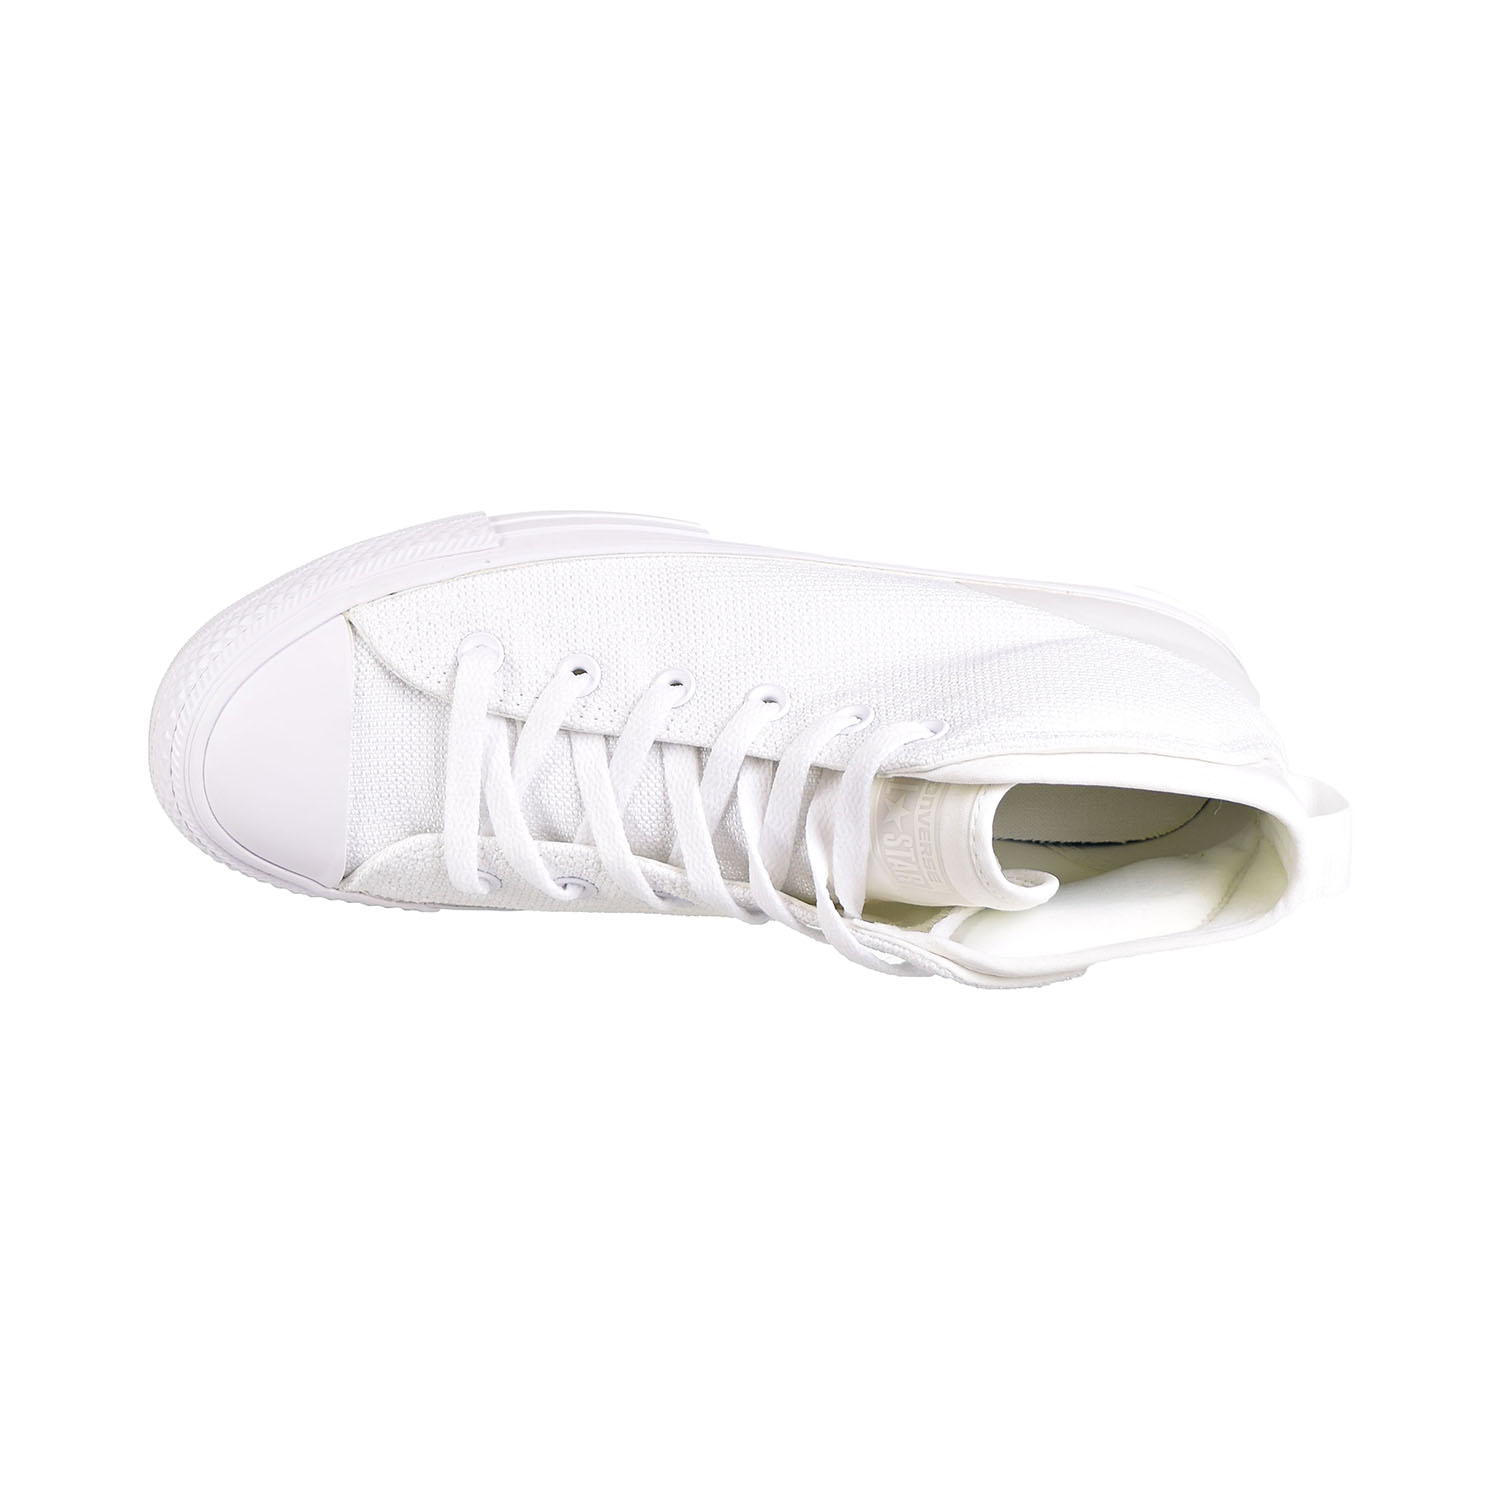 Converse Chuck Taylor All Star Syde Street Men's Shoes White-White 155490c - image 5 of 6